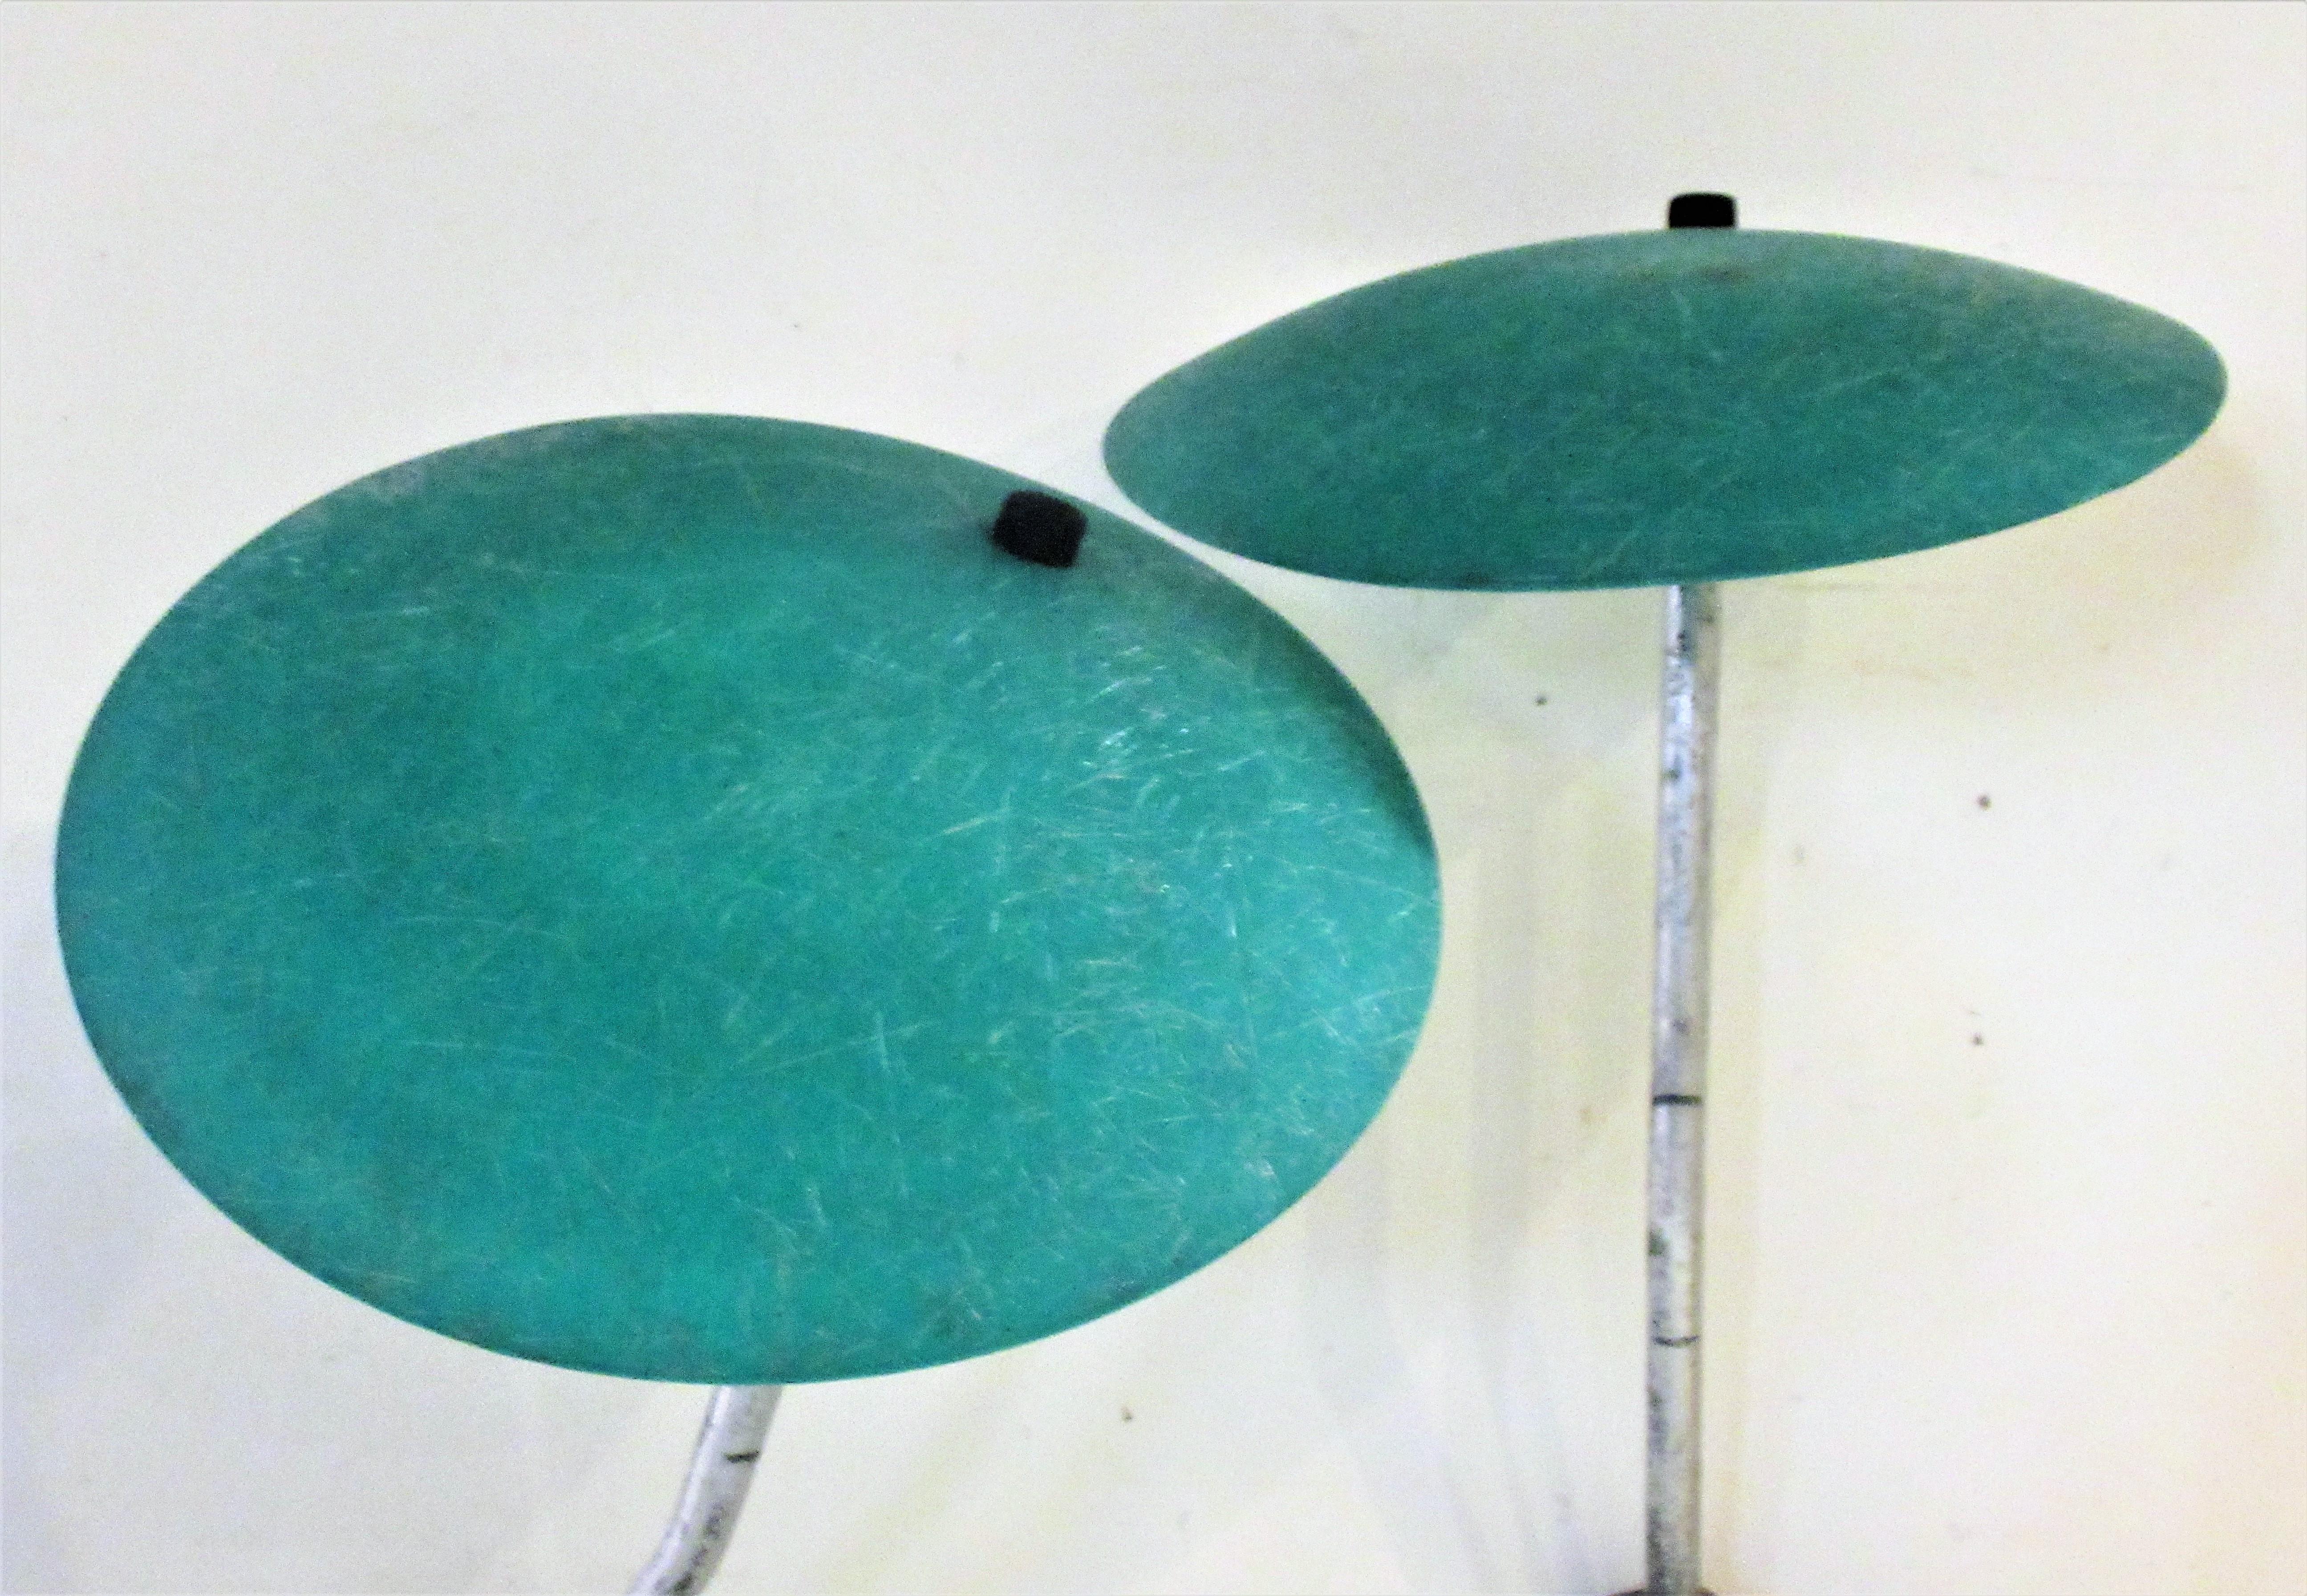 A pair of green fiberglass saucer shade portable electric outdoor lawn lamps mounted on staked tubular aluminum poles. The electric boxes at bottom with wiring and plugs of Industrial quality. The sockets are porcelain. Great looking sculptural form